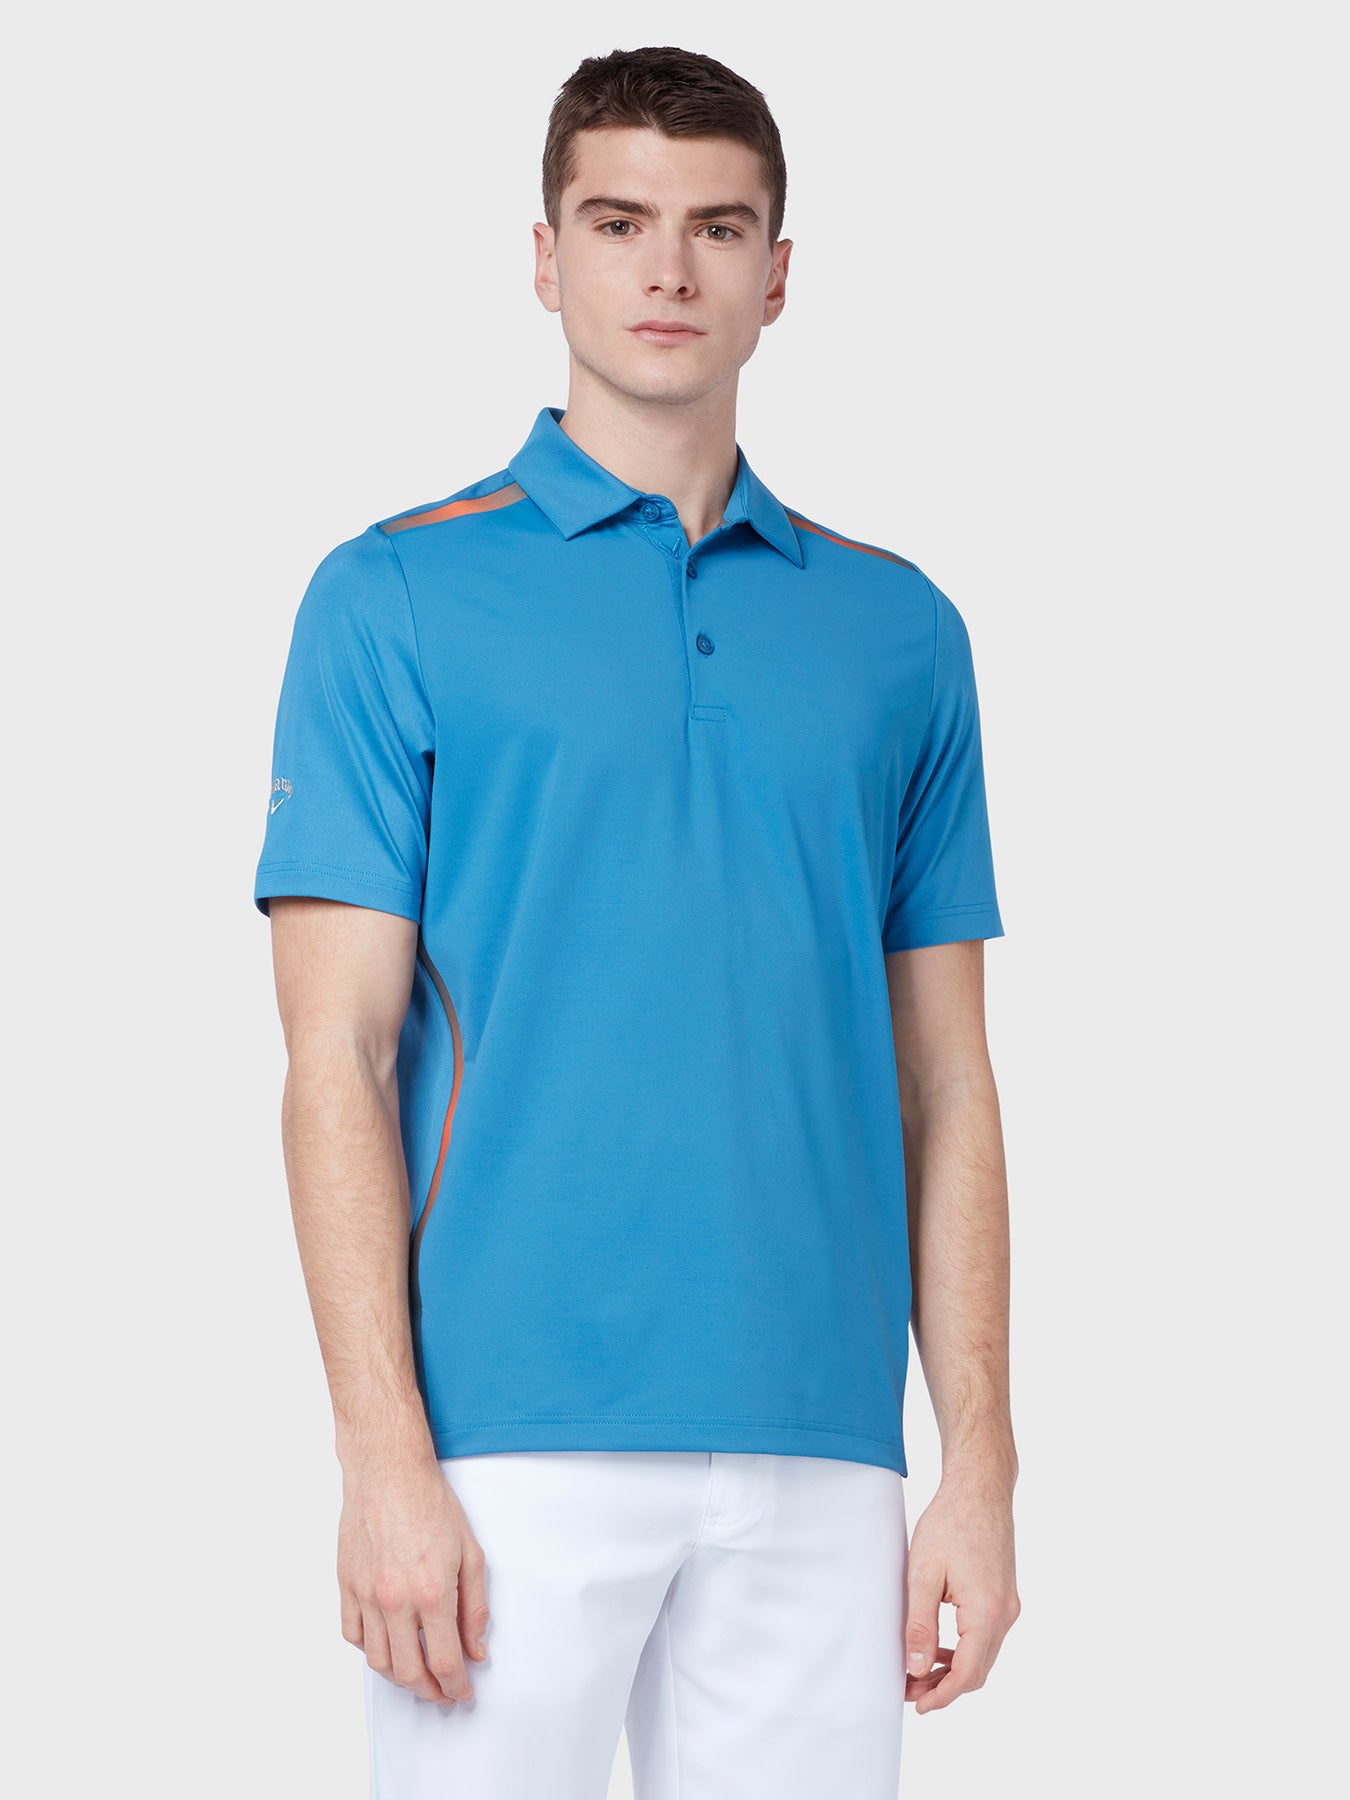 View Performance Colour Block Polo In Vallarta Blue information